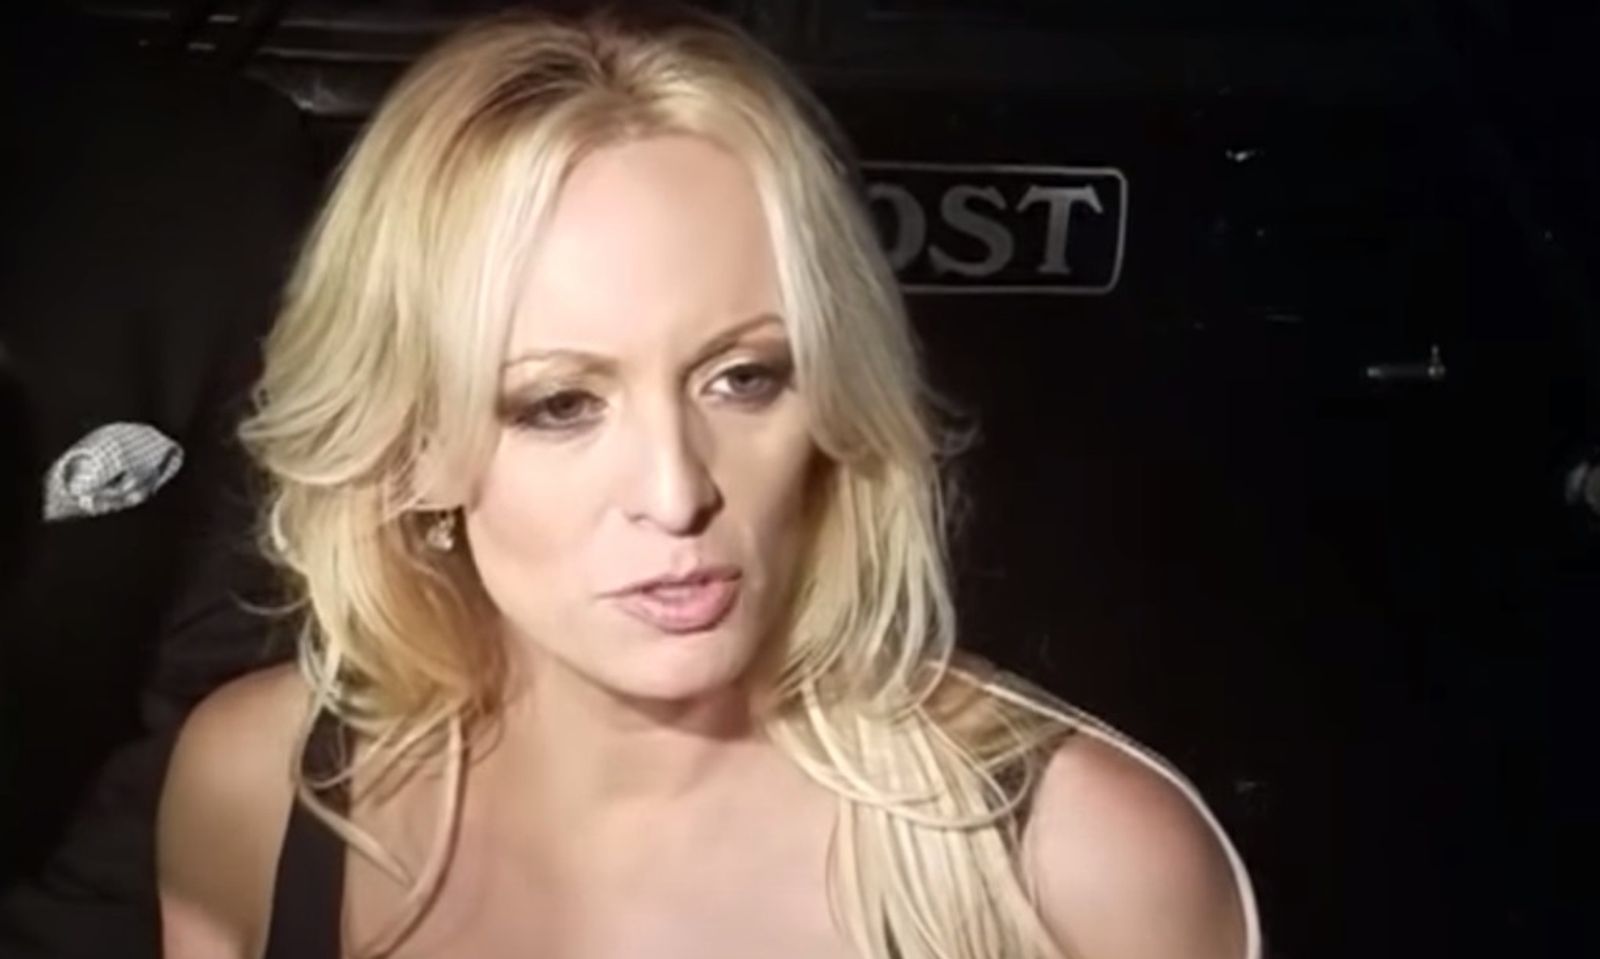 Trump Lawyer Files Motion To Make Stormy Daniels Pay His Fees